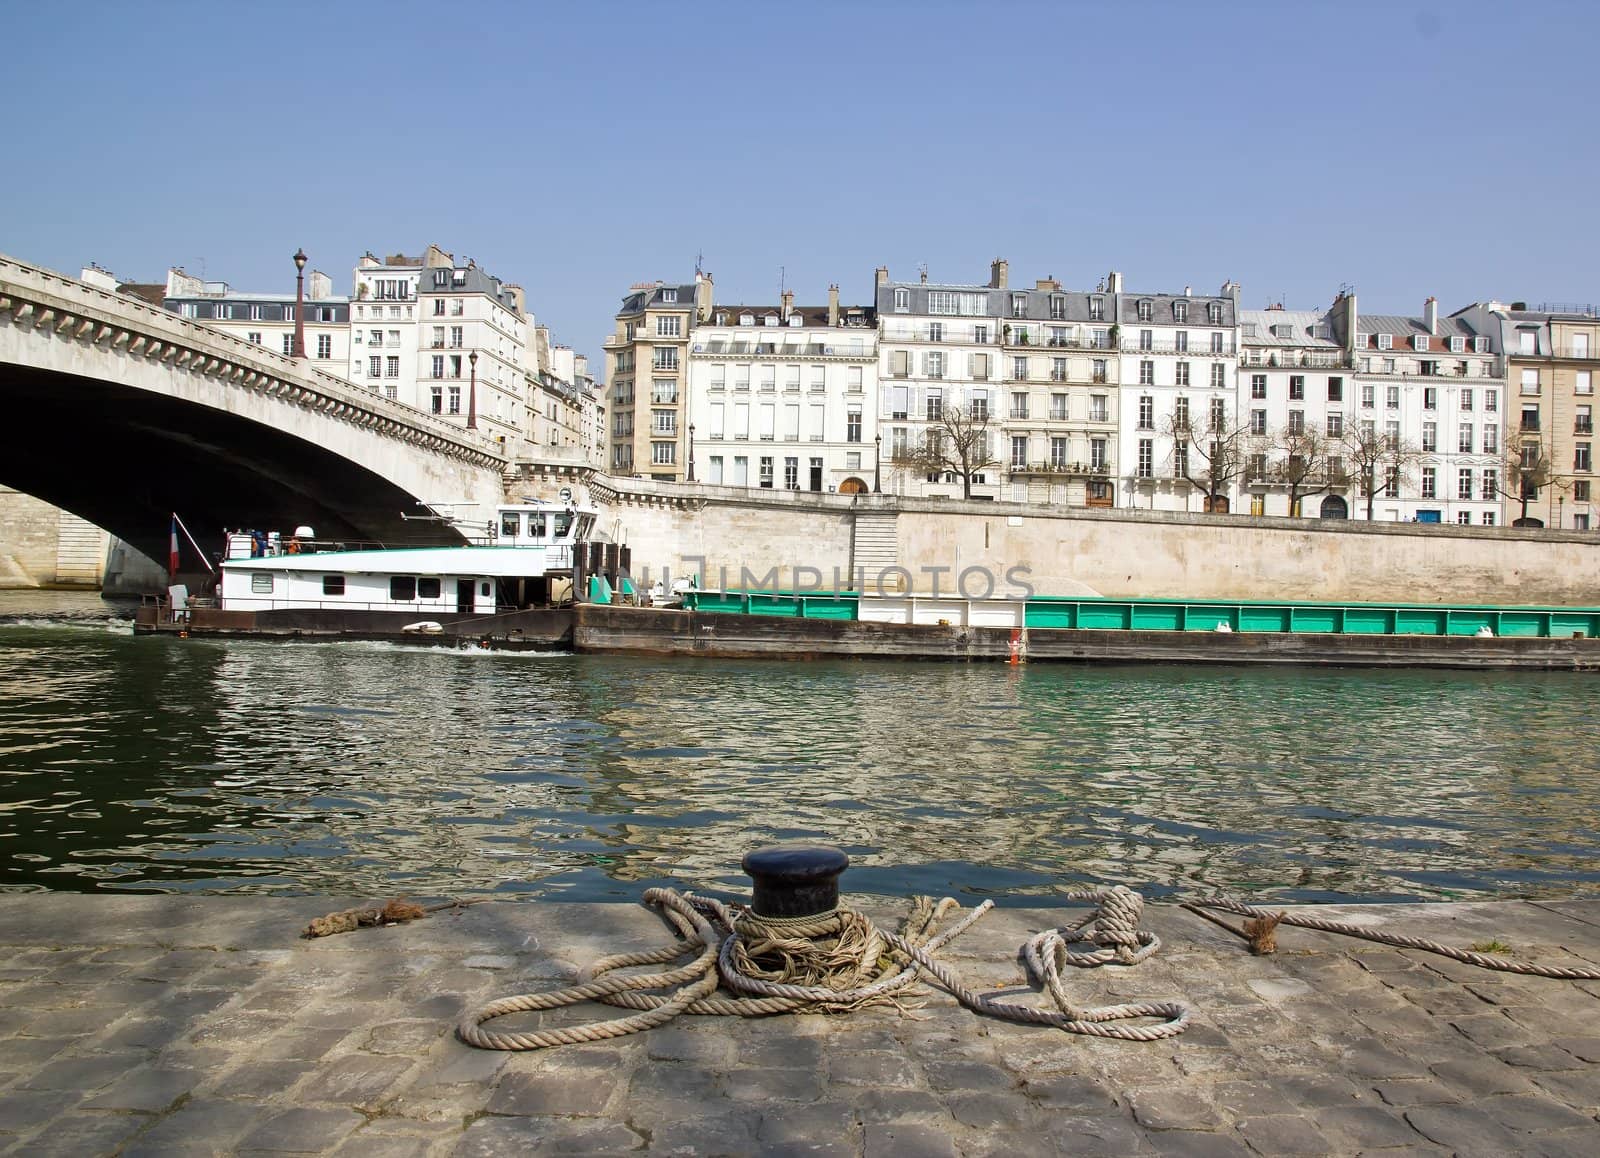 passage of a barge on the Seine by neko92vl